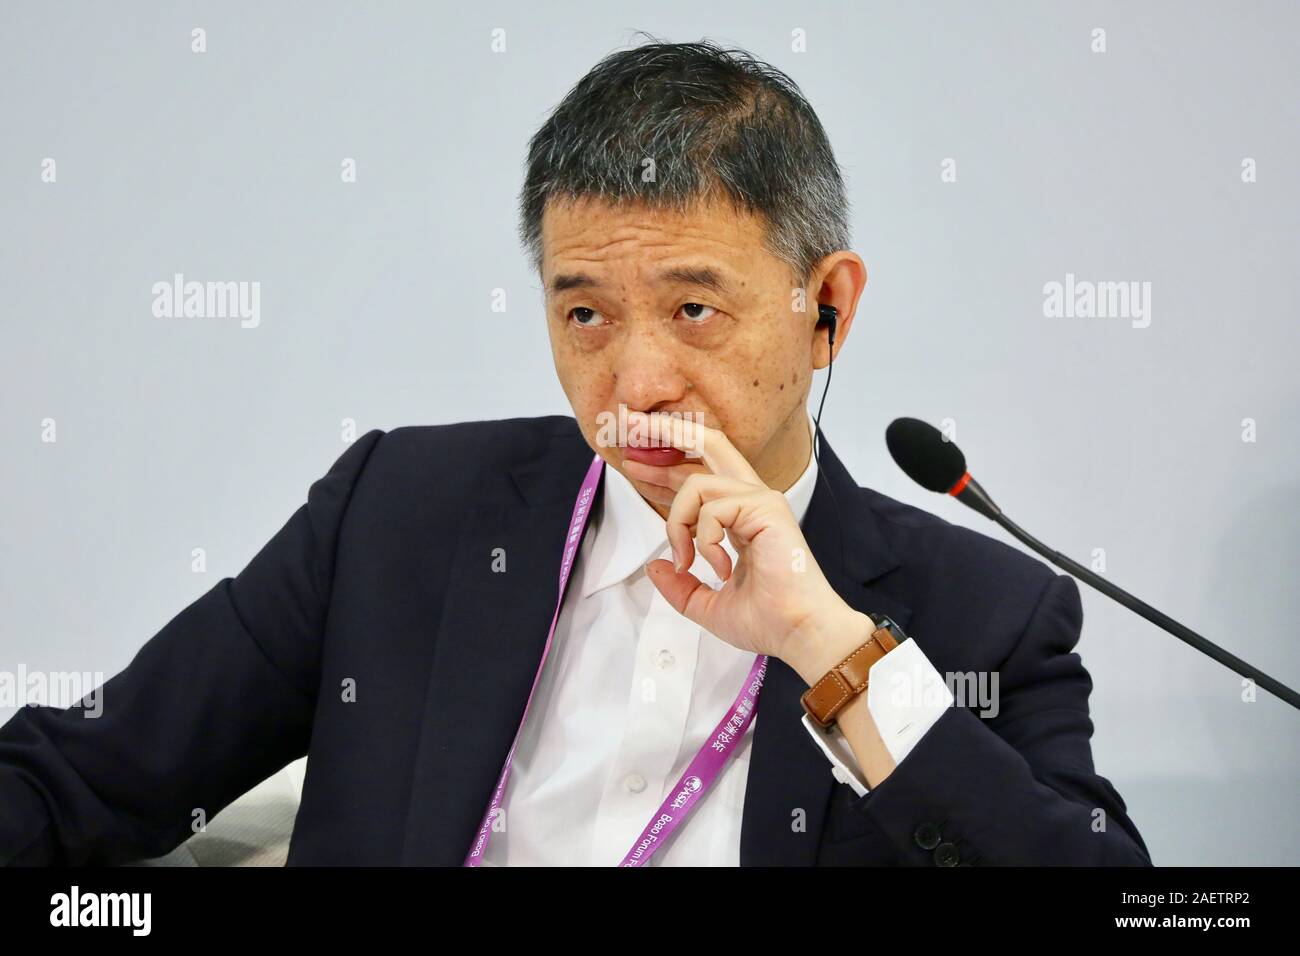 --FILE--Wang Jian, CTO of Chinese multinational conglomerate holding company Alibaba Group, attends Boao Forum for Asia in Boao town, Qionghai city, s Stock Photo